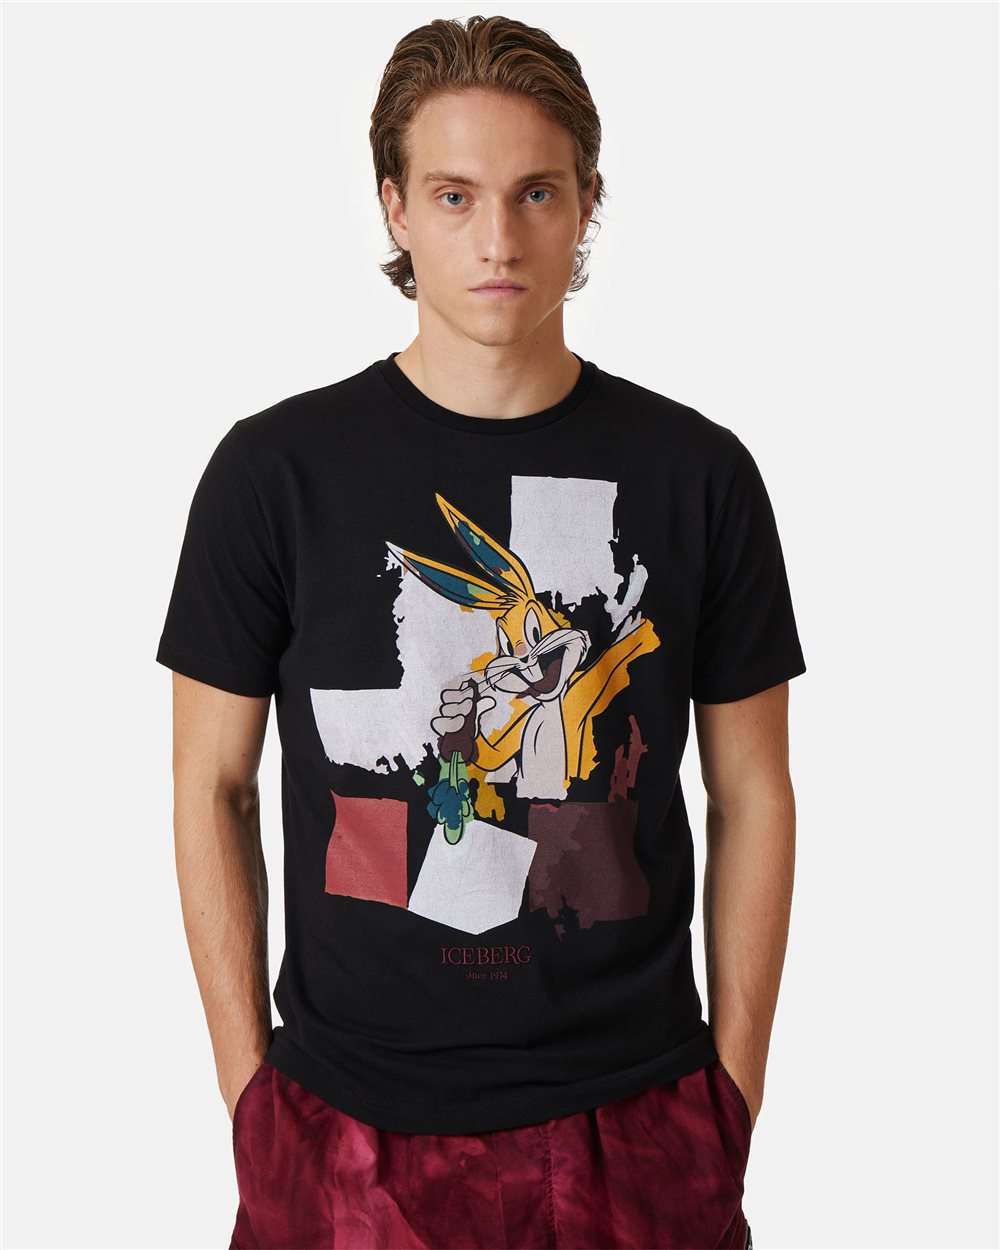 Black T-shirt with cartoon graphic - Iceberg - Official Website